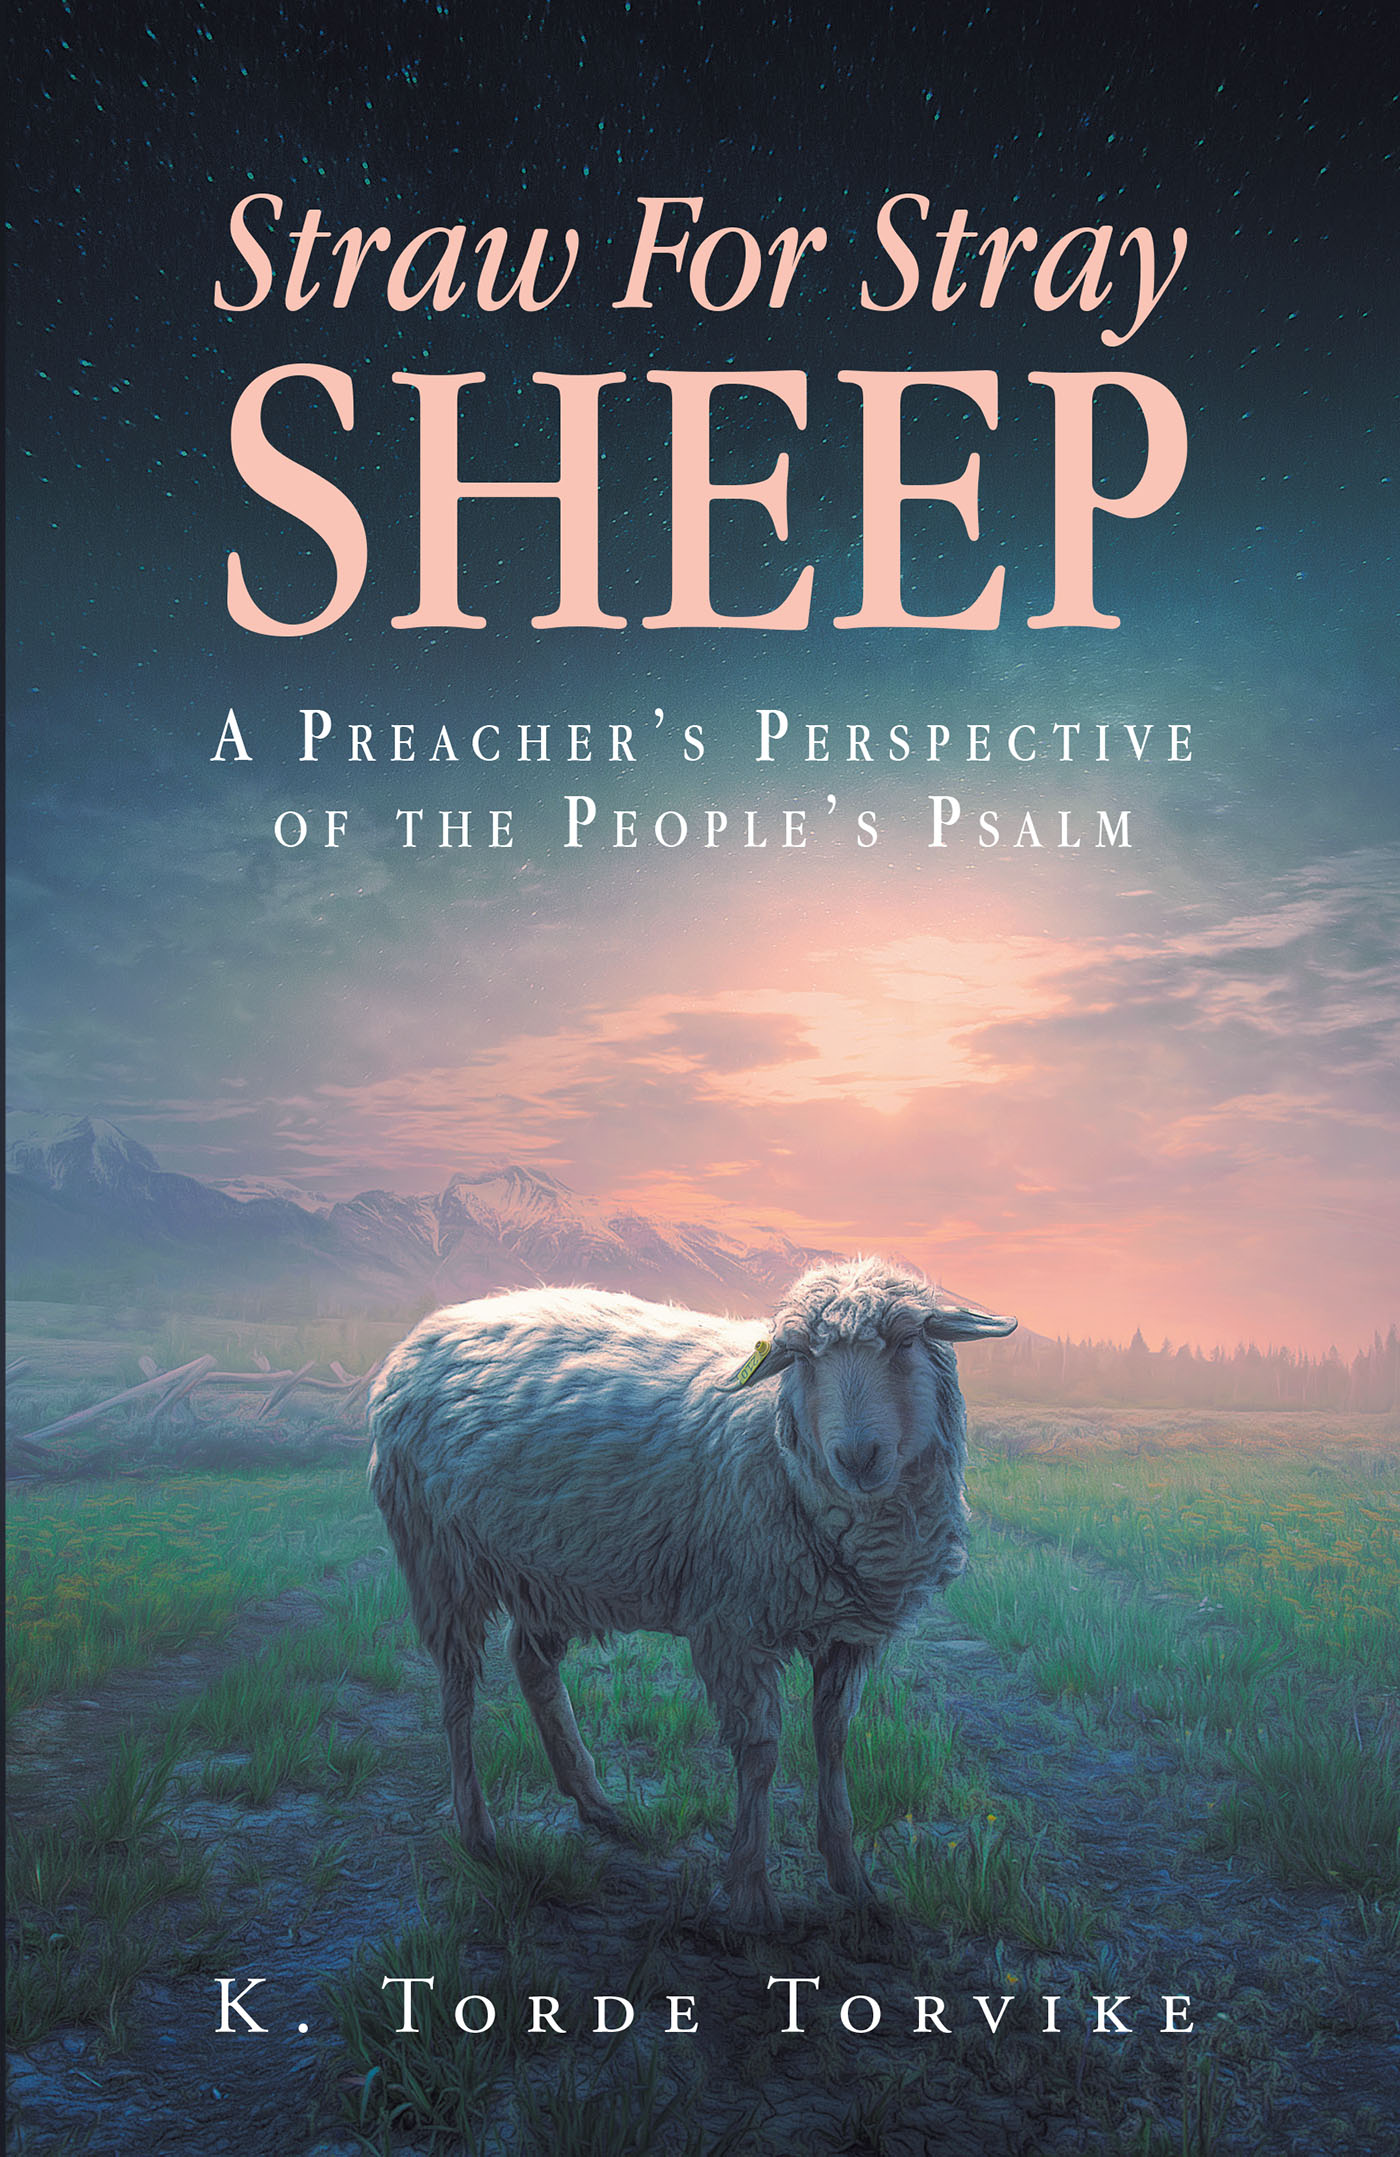 K. Torde Torvike’s Newly Released “Straw For Stray Sheep: A Preacher’s Perspective Of The People’s Psalm” is a Thoughtful Four-Part Study of Psalm 23